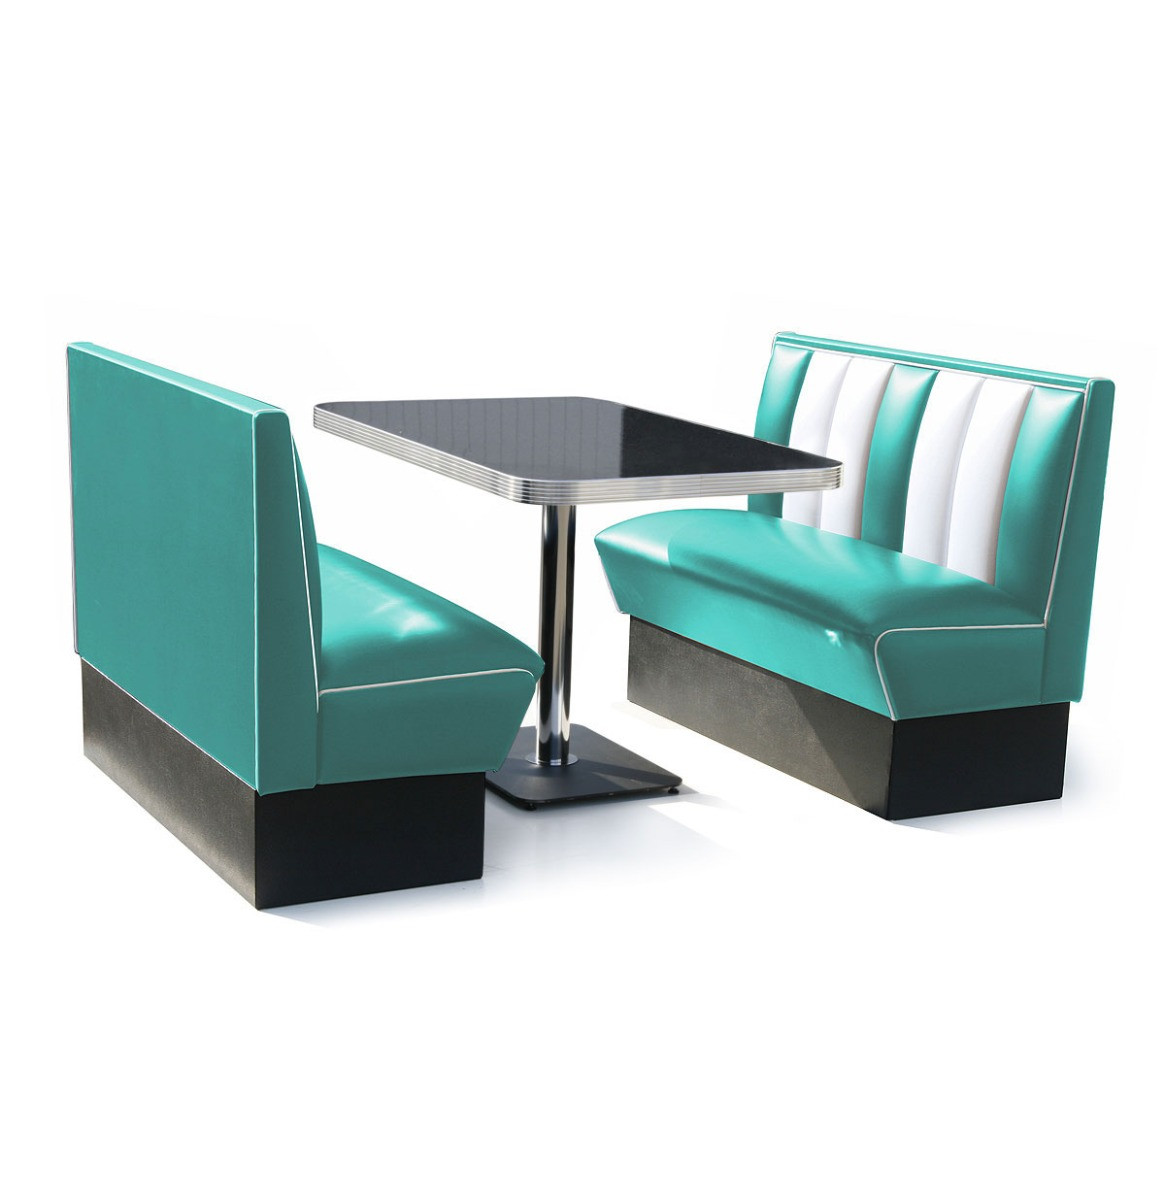 2 x Classic Dinerbooth Turquoise + Table